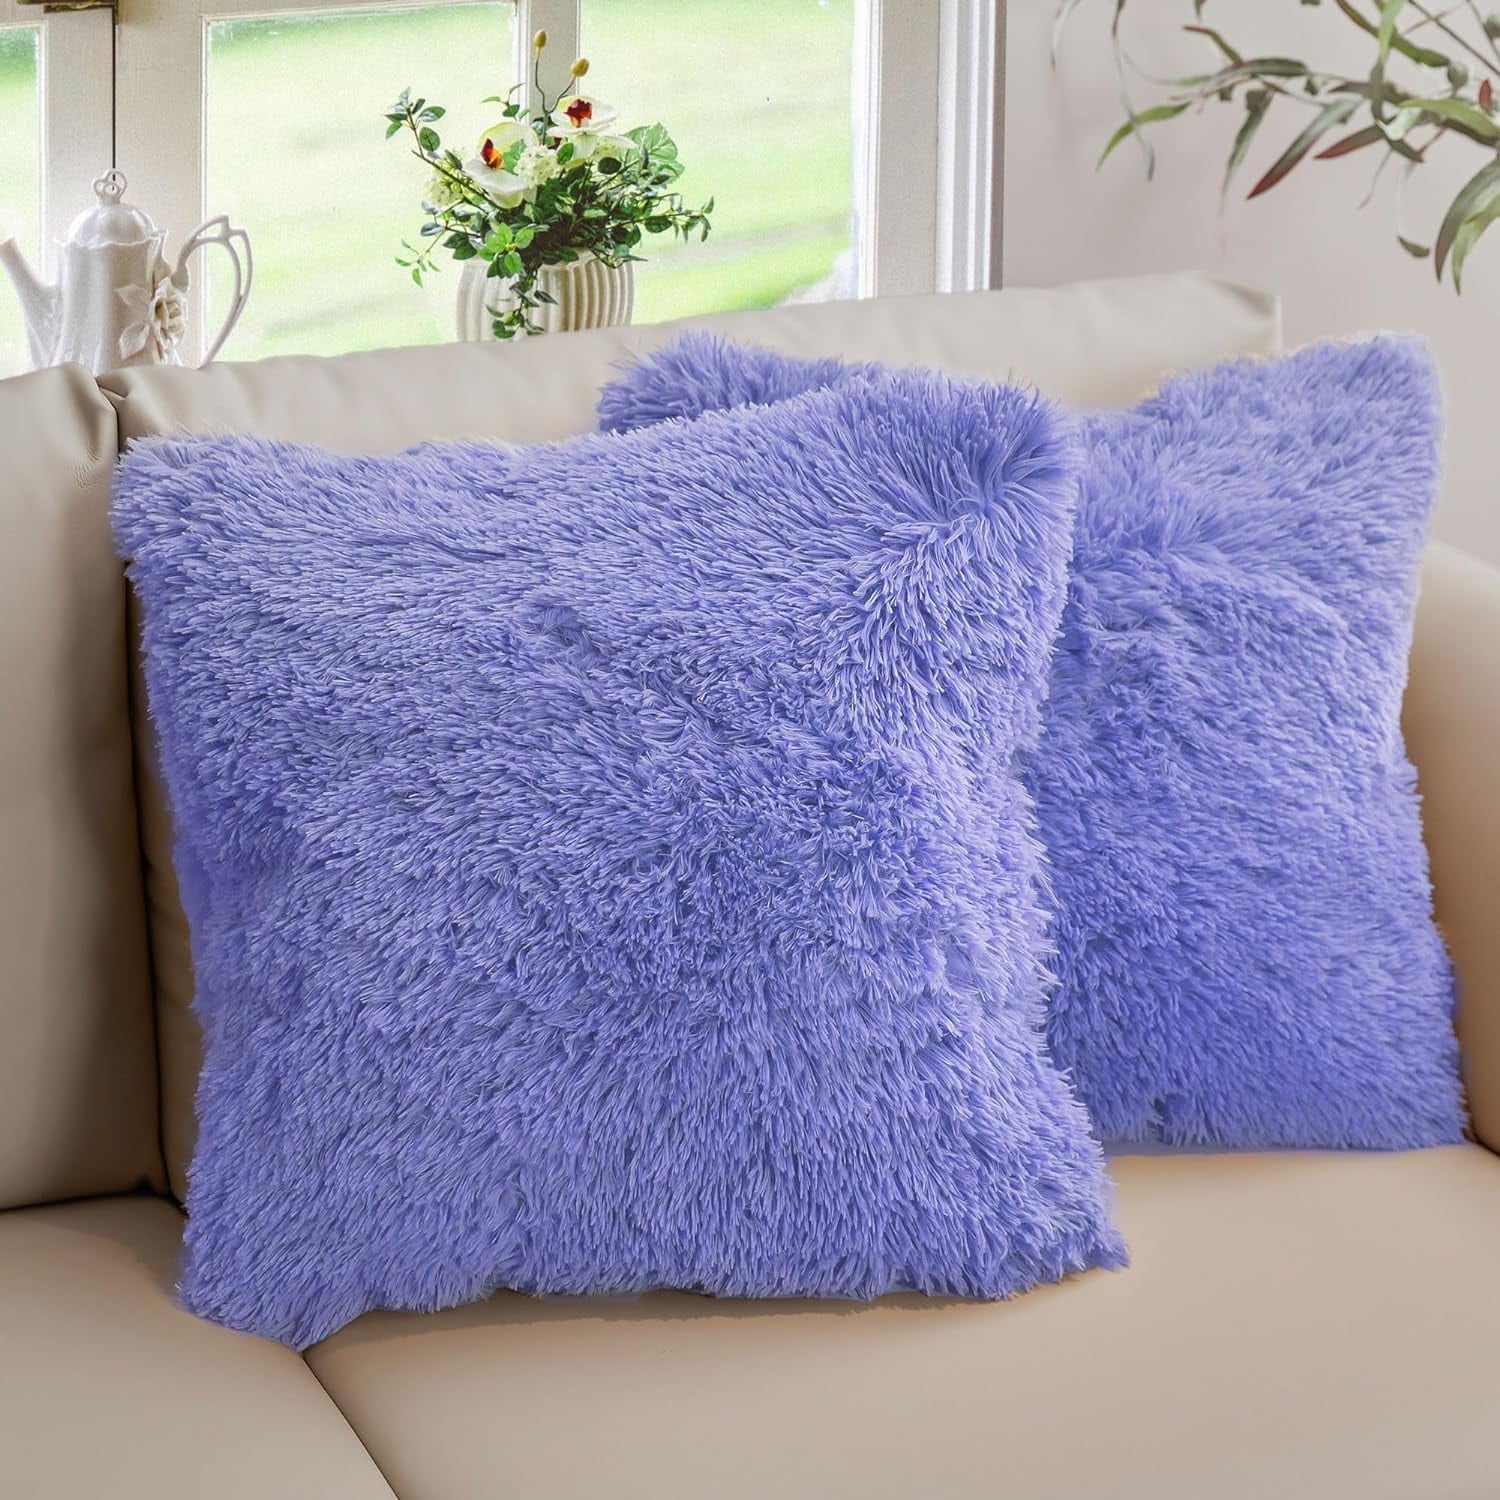 https://ak1.ostkcdn.com/images/products/is/images/direct/cad7421fa698d07f5f66783841f356e3773a1c5c/Cheer-Collection-Shaggy-Long-Hair-Throw-Pillows-%28Set-of-2%29.jpg